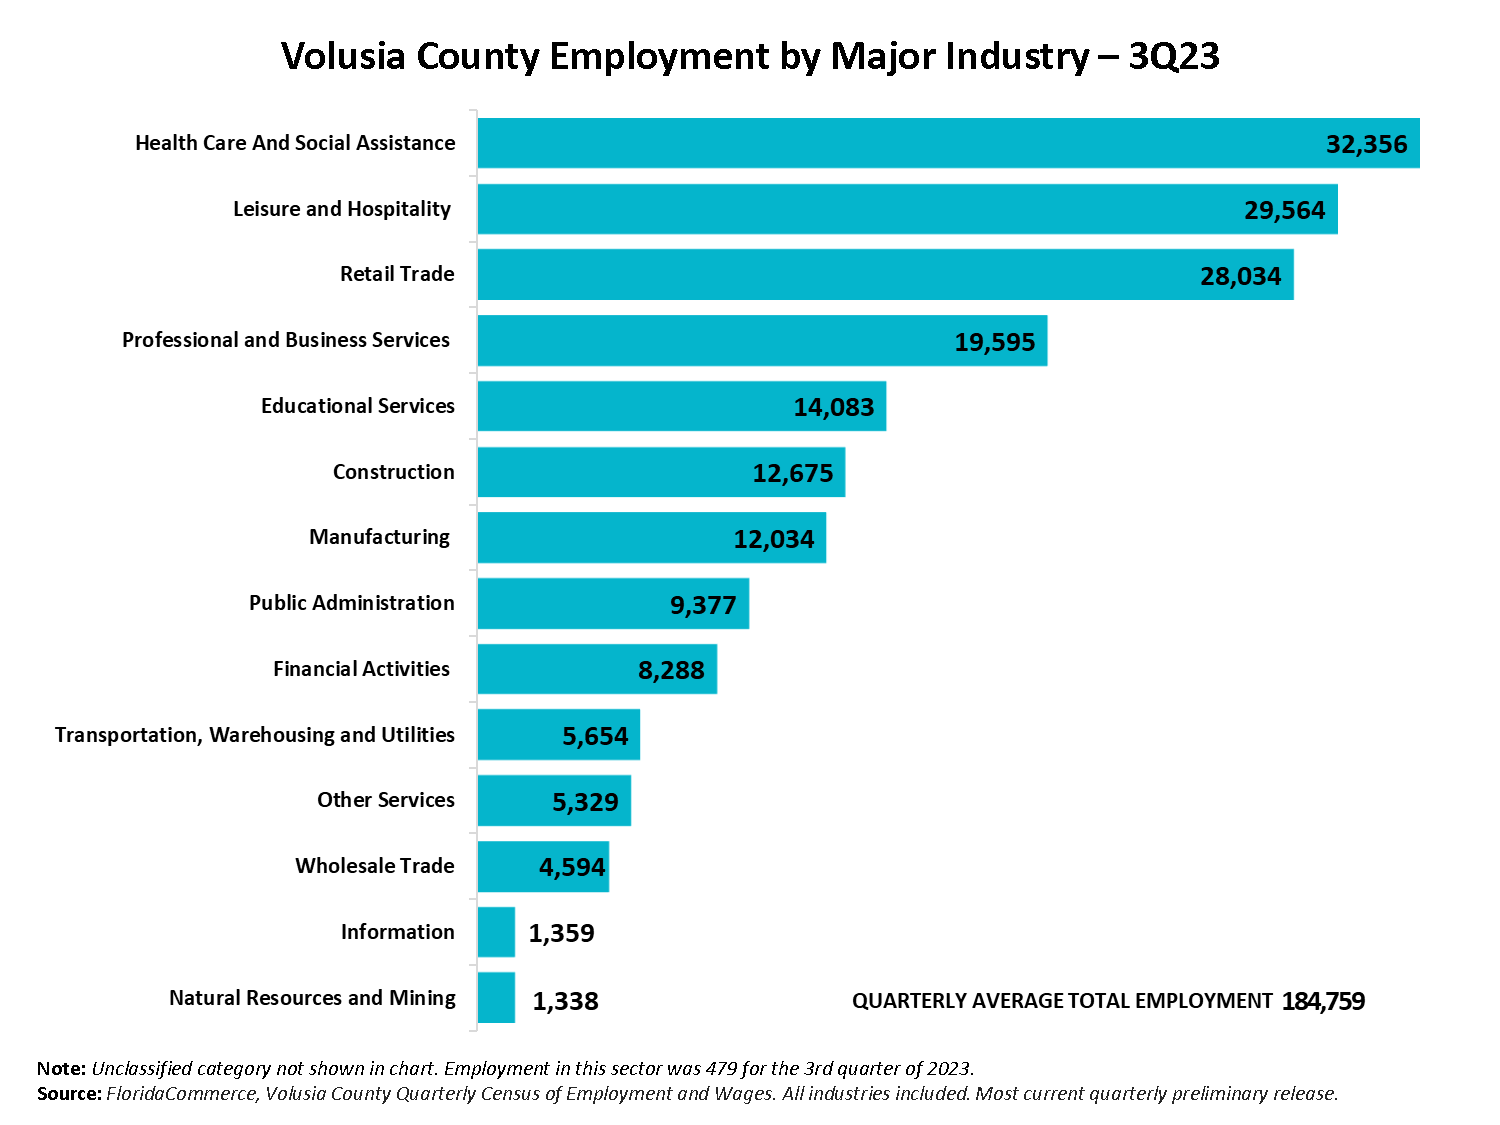 The chart shows the Volusia County employment levels by the major super sector industries for the 3rd quarter of 2023. Health Care and Social Assistance – 32,356, Leisure and Hospitality – 29,564, Retail Trade – 28,034, Professional and Business Services – 19,595, Educational Services – 14,083, Construction – 12,675, Manufacturing – 12,034, Public Administration – 9,377, Financial Activities – 8,288, Transportation, Warehousing and Utilities – 5,654, Other Services – 5,329, Wholesale Trade – 4,594, Information – 1,359, Natural Resources and Mining – 1,338. The quarterly average total employment was 184,759 which is a 2.4% increase over the same period last year in the 3rd quarter of 2023.